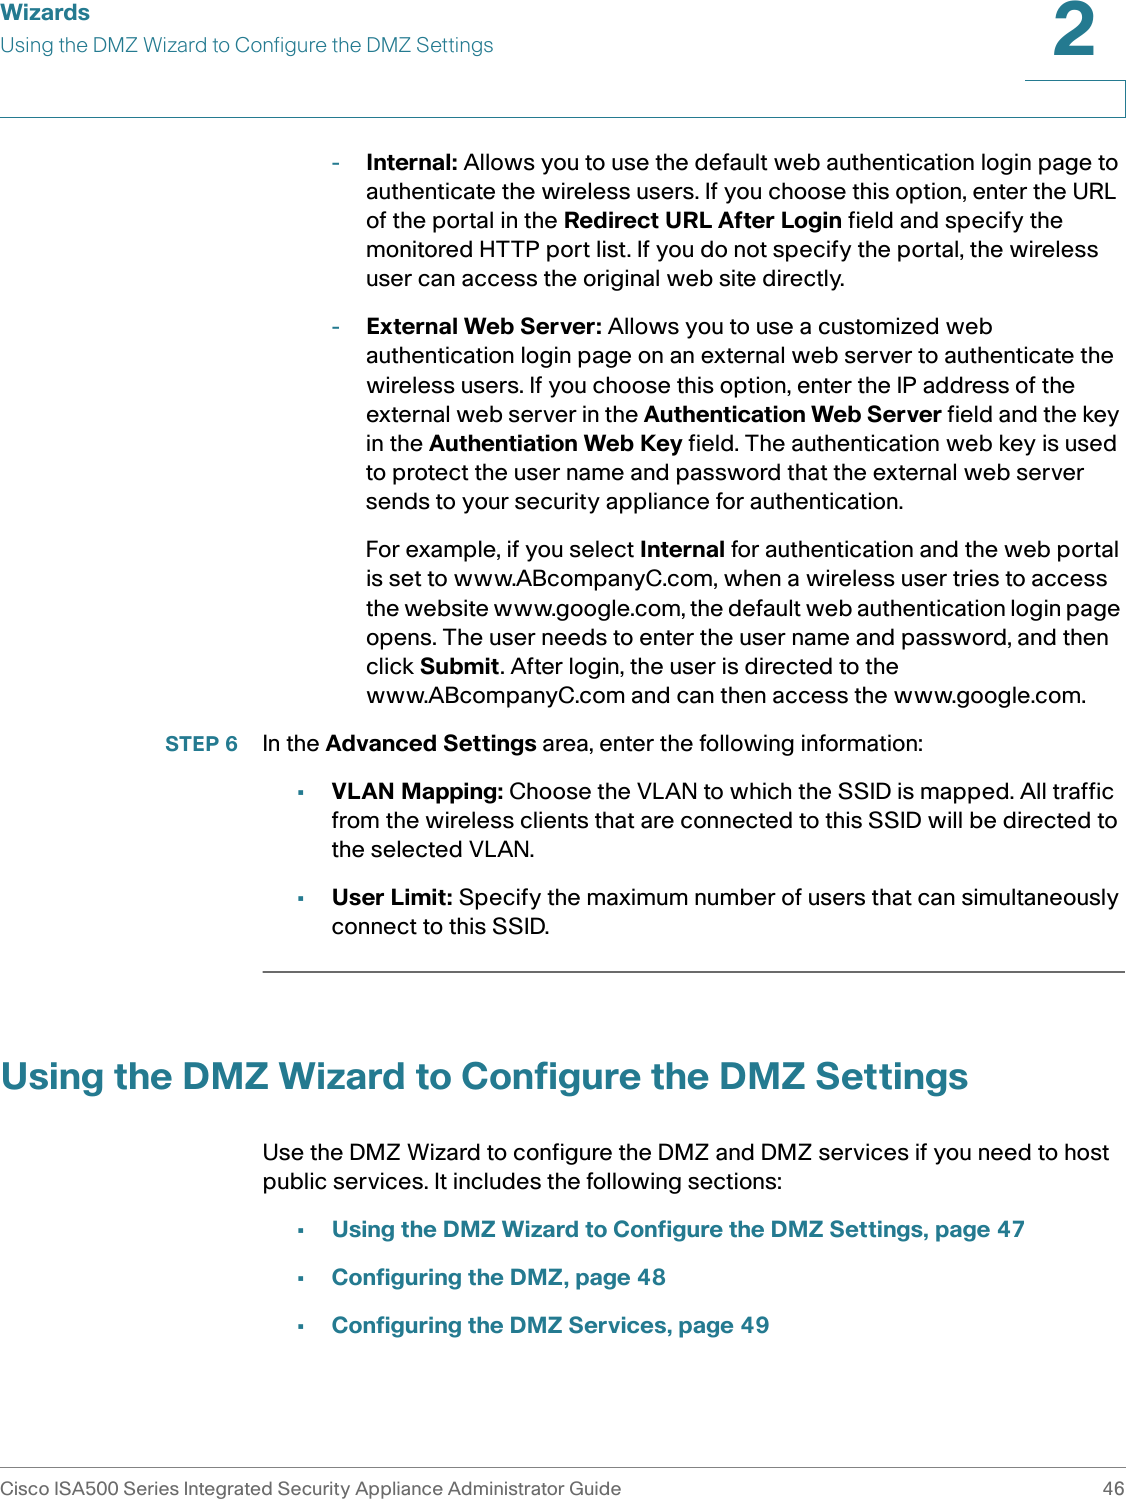 WizardsUsing the DMZ Wizard to Configure the DMZ SettingsCisco ISA500 Series Integrated Security Appliance Administrator Guide 462 -Internal: Allows you to use the default web authentication login page to authenticate the wireless users. If you choose this option, enter the URL of the portal in the Redirect URL After Login field and specify the monitored HTTP port list. If you do not specify the portal, the wireless user can access the original web site directly. -External Web Server: Allows you to use a customized web authentication login page on an external web server to authenticate the wireless users. If you choose this option, enter the IP address of the external web server in the Authentication Web Server field and the key in the Authentiation Web Key field. The authentication web key is used to protect the user name and password that the external web server sends to your security appliance for authentication. For example, if you select Internal for authentication and the web portal is set to www.ABcompanyC.com, when a wireless user tries to access the website www.google.com, the default web authentication login page opens. The user needs to enter the user name and password, and then click Submit. After login, the user is directed to the www.ABcompanyC.com and can then access the www.google.com. STEP 6 In the Advanced Settings area, enter the following information: •VLAN Mapping: Choose the VLAN to which the SSID is mapped. All traffic from the wireless clients that are connected to this SSID will be directed to the selected VLAN. •User Limit: Specify the maximum number of users that can simultaneously connect to this SSID. Using the DMZ Wizard to Configure the DMZ SettingsUse the DMZ Wizard to configure the DMZ and DMZ services if you need to host public services. It includes the following sections: •Using the DMZ Wizard to Configure the DMZ Settings, page 47•Configuring the DMZ, page 48•Configuring the DMZ Services, page 49